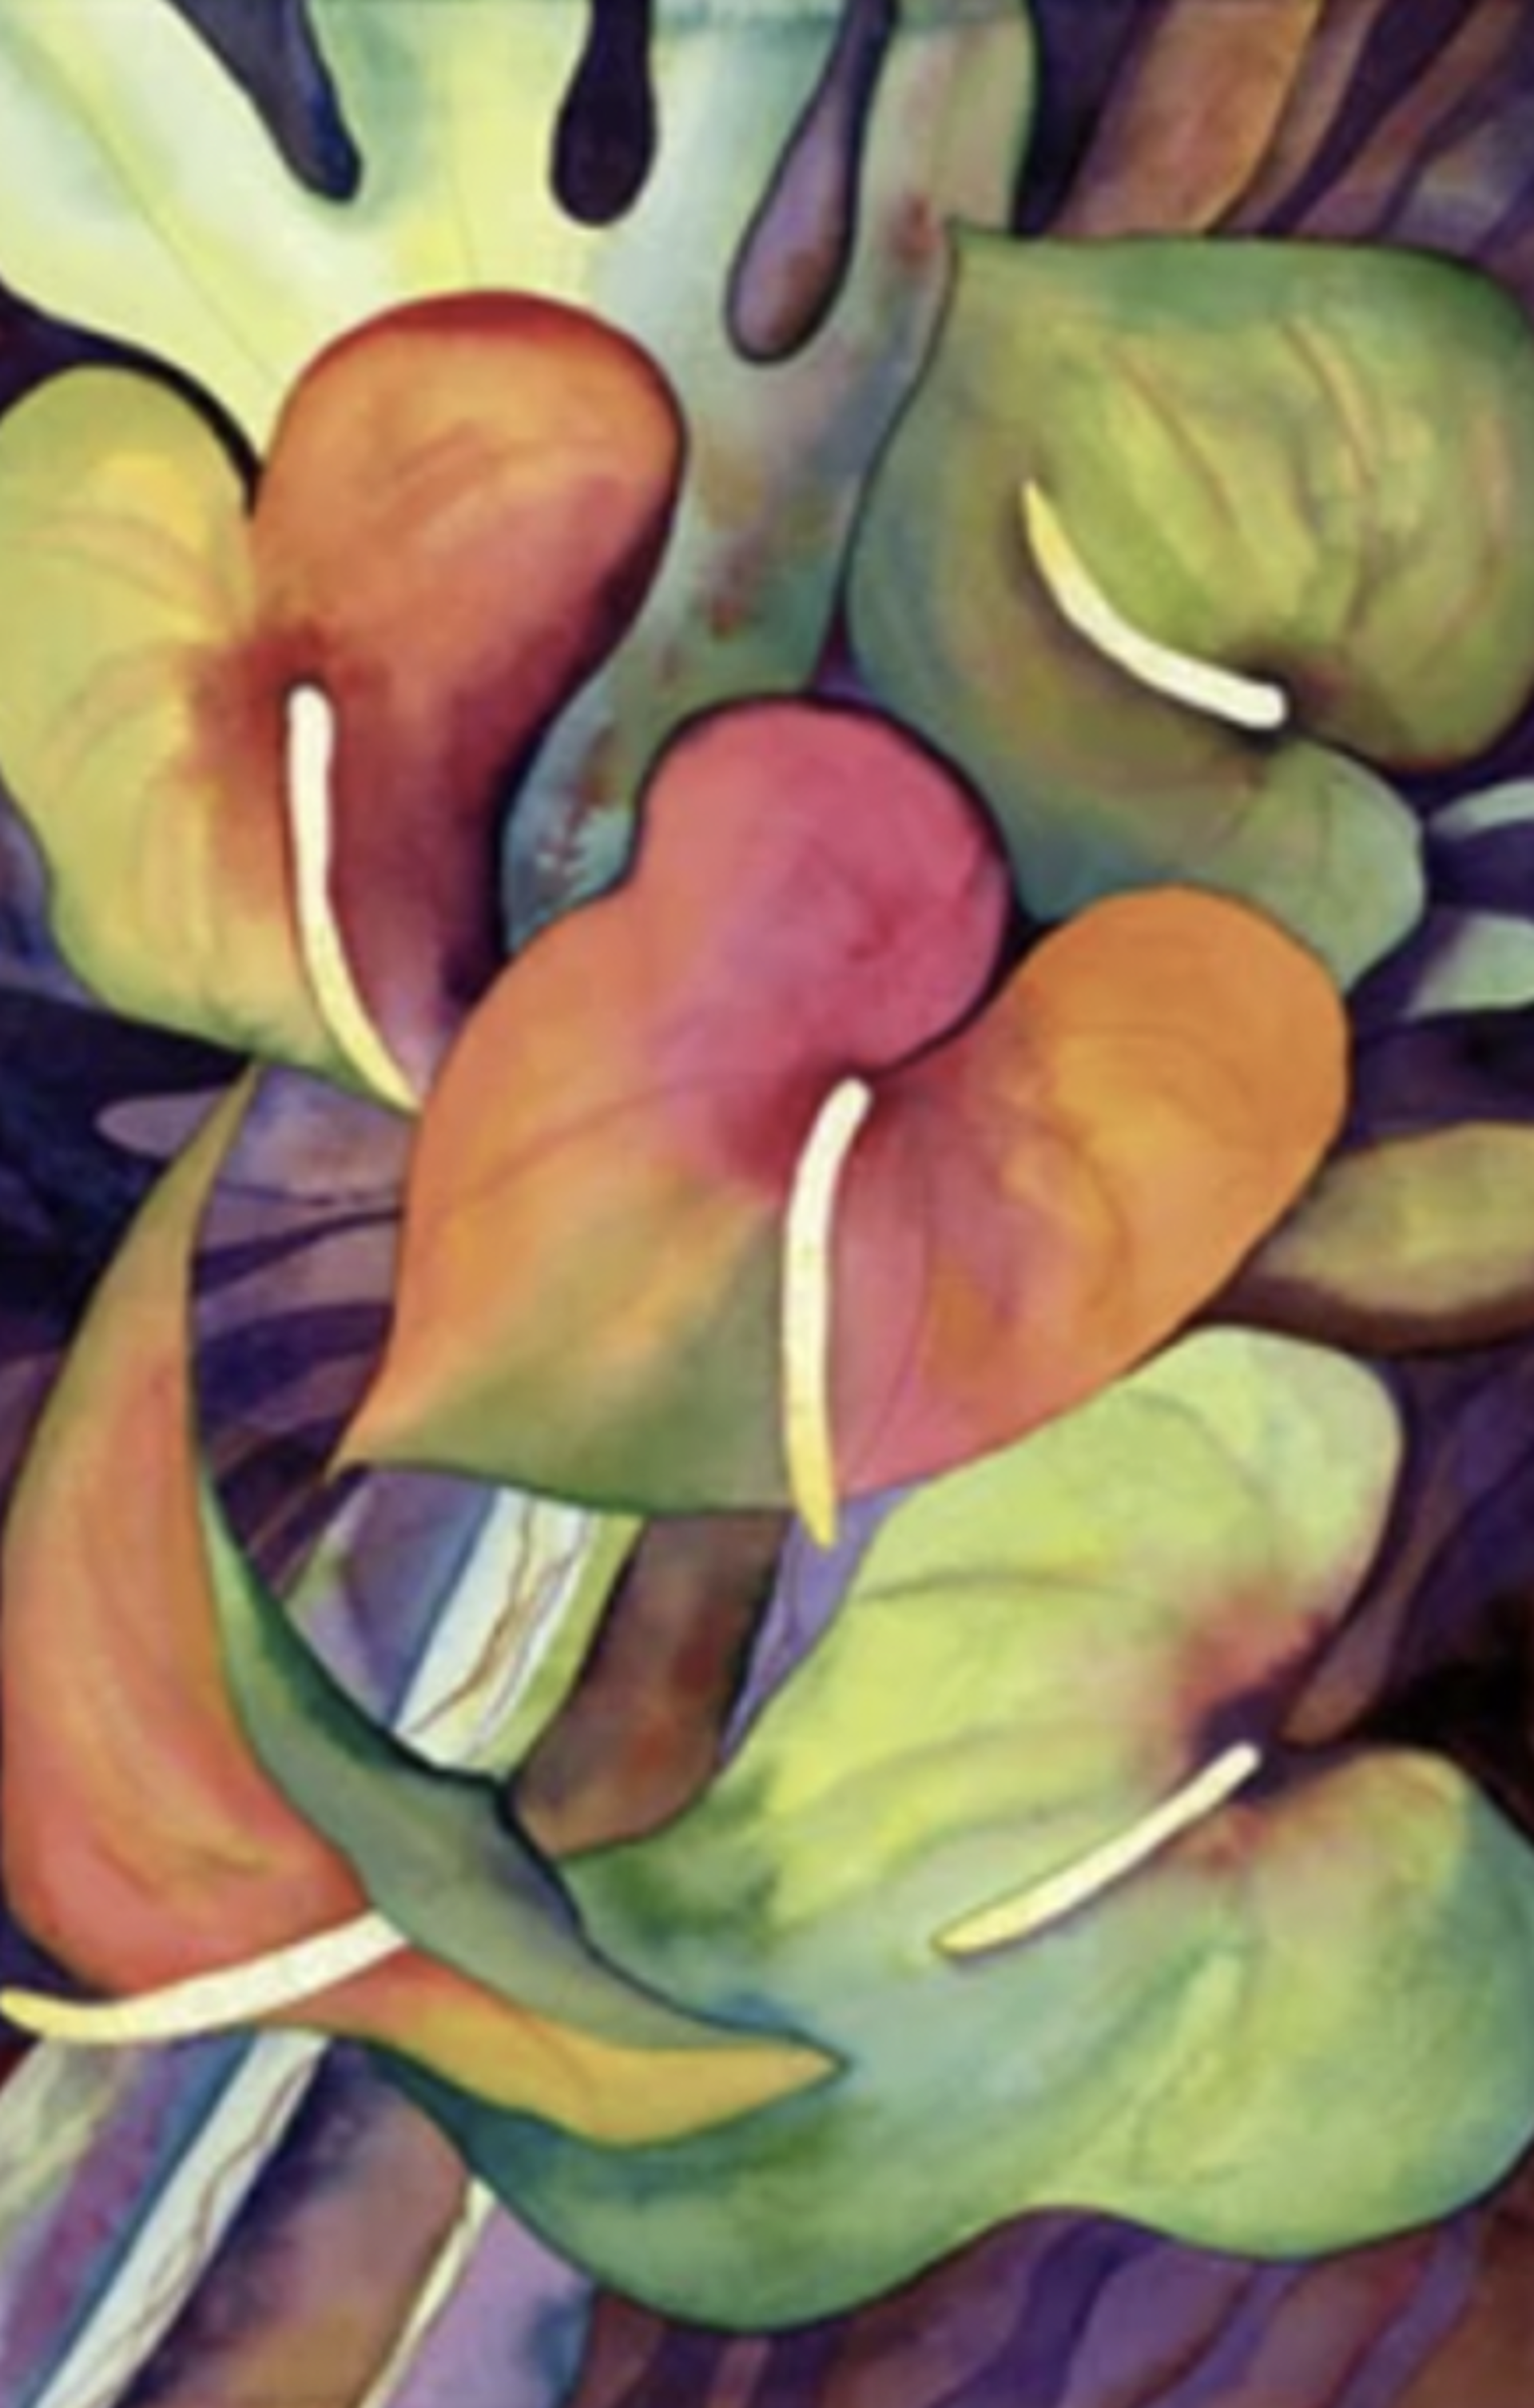 Big Island Anthuriums by Jocelyn Cheng